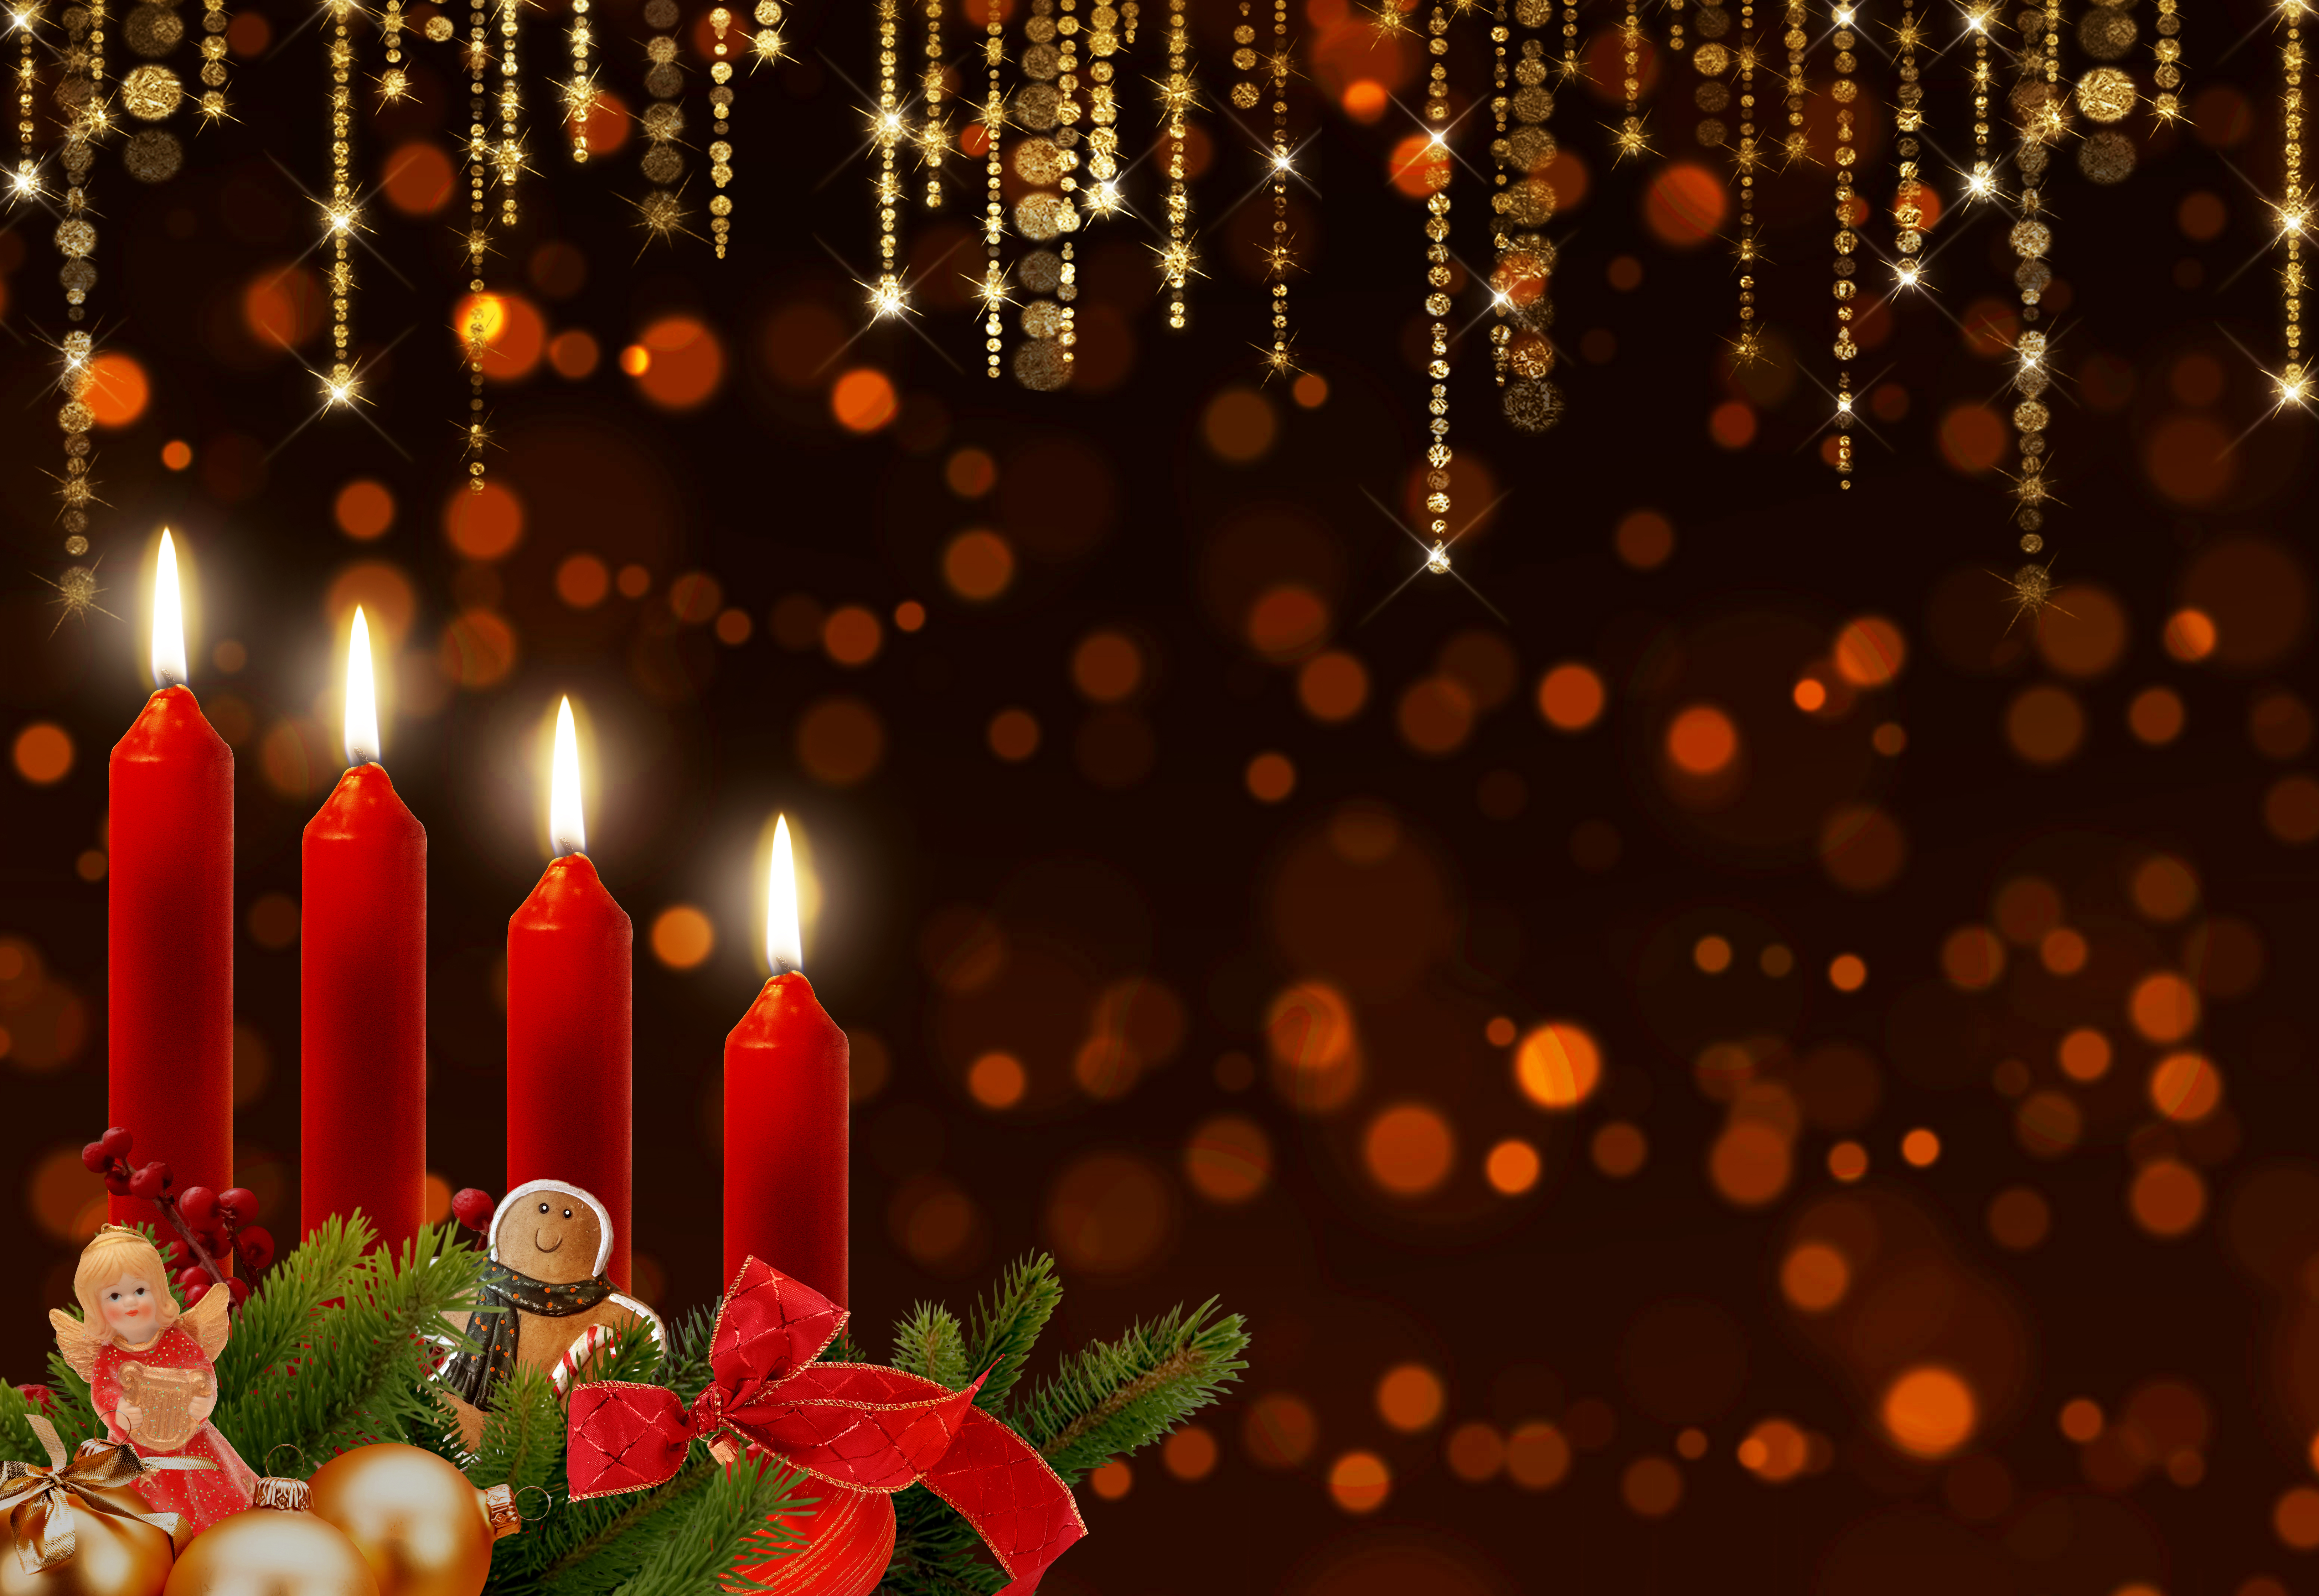 Free Image, advent, candles, wreath, bokeh, glitter, glow, holiday, candlelight, 4advent, decorative, background, greeting, copy space, christmas decoration, lighting, christmas lights, tradition, event, fete, night, decor, computer wallpaper